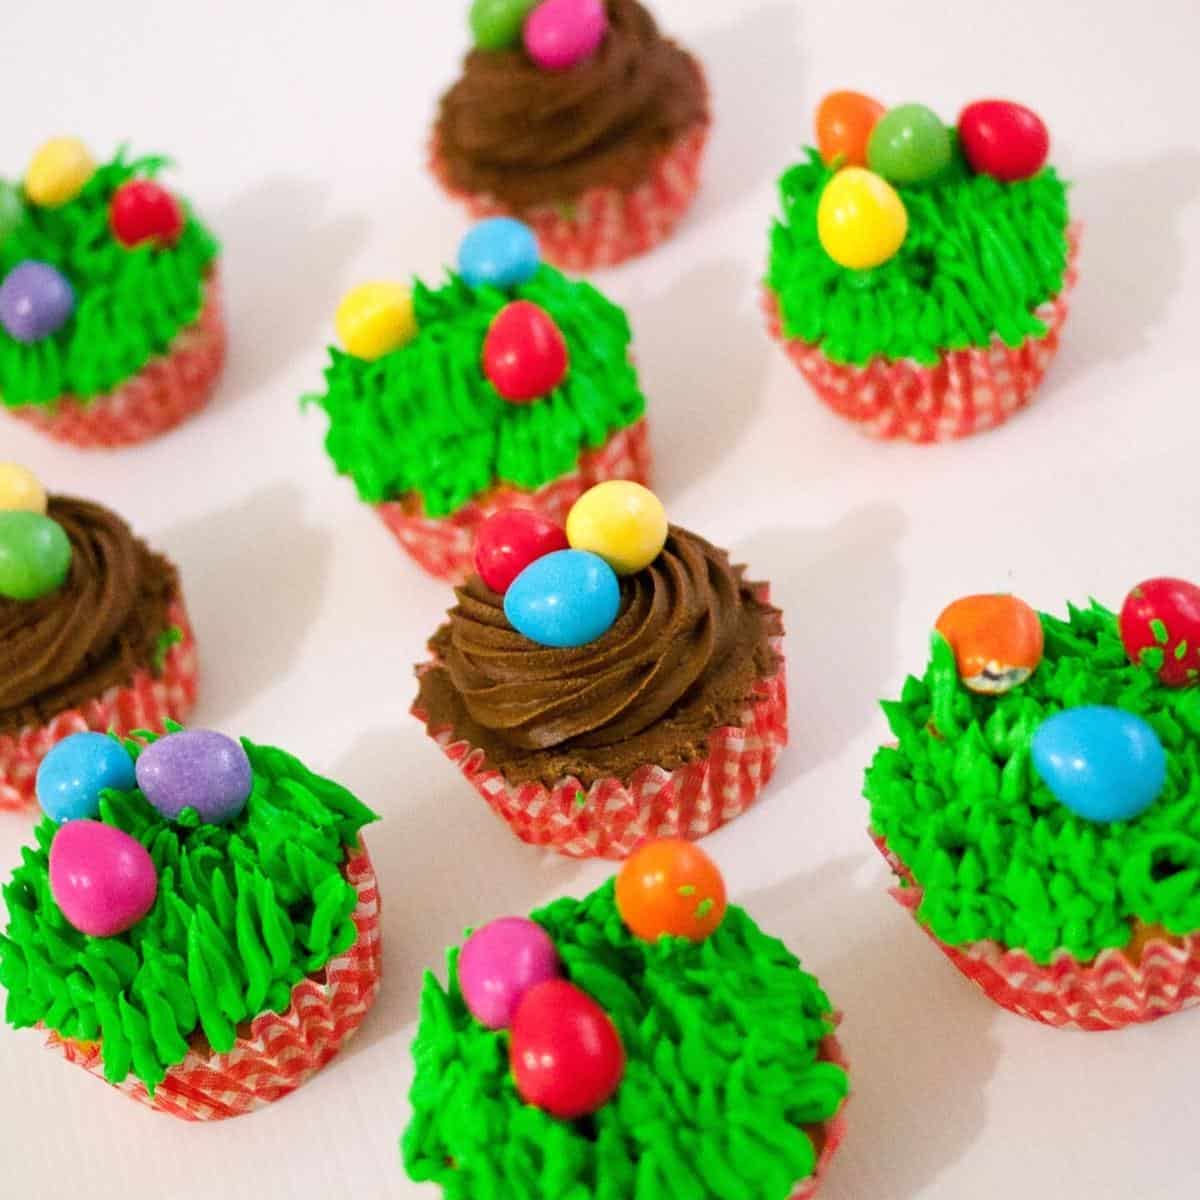 Carrot Easter Cupcakes with Candy Eggs